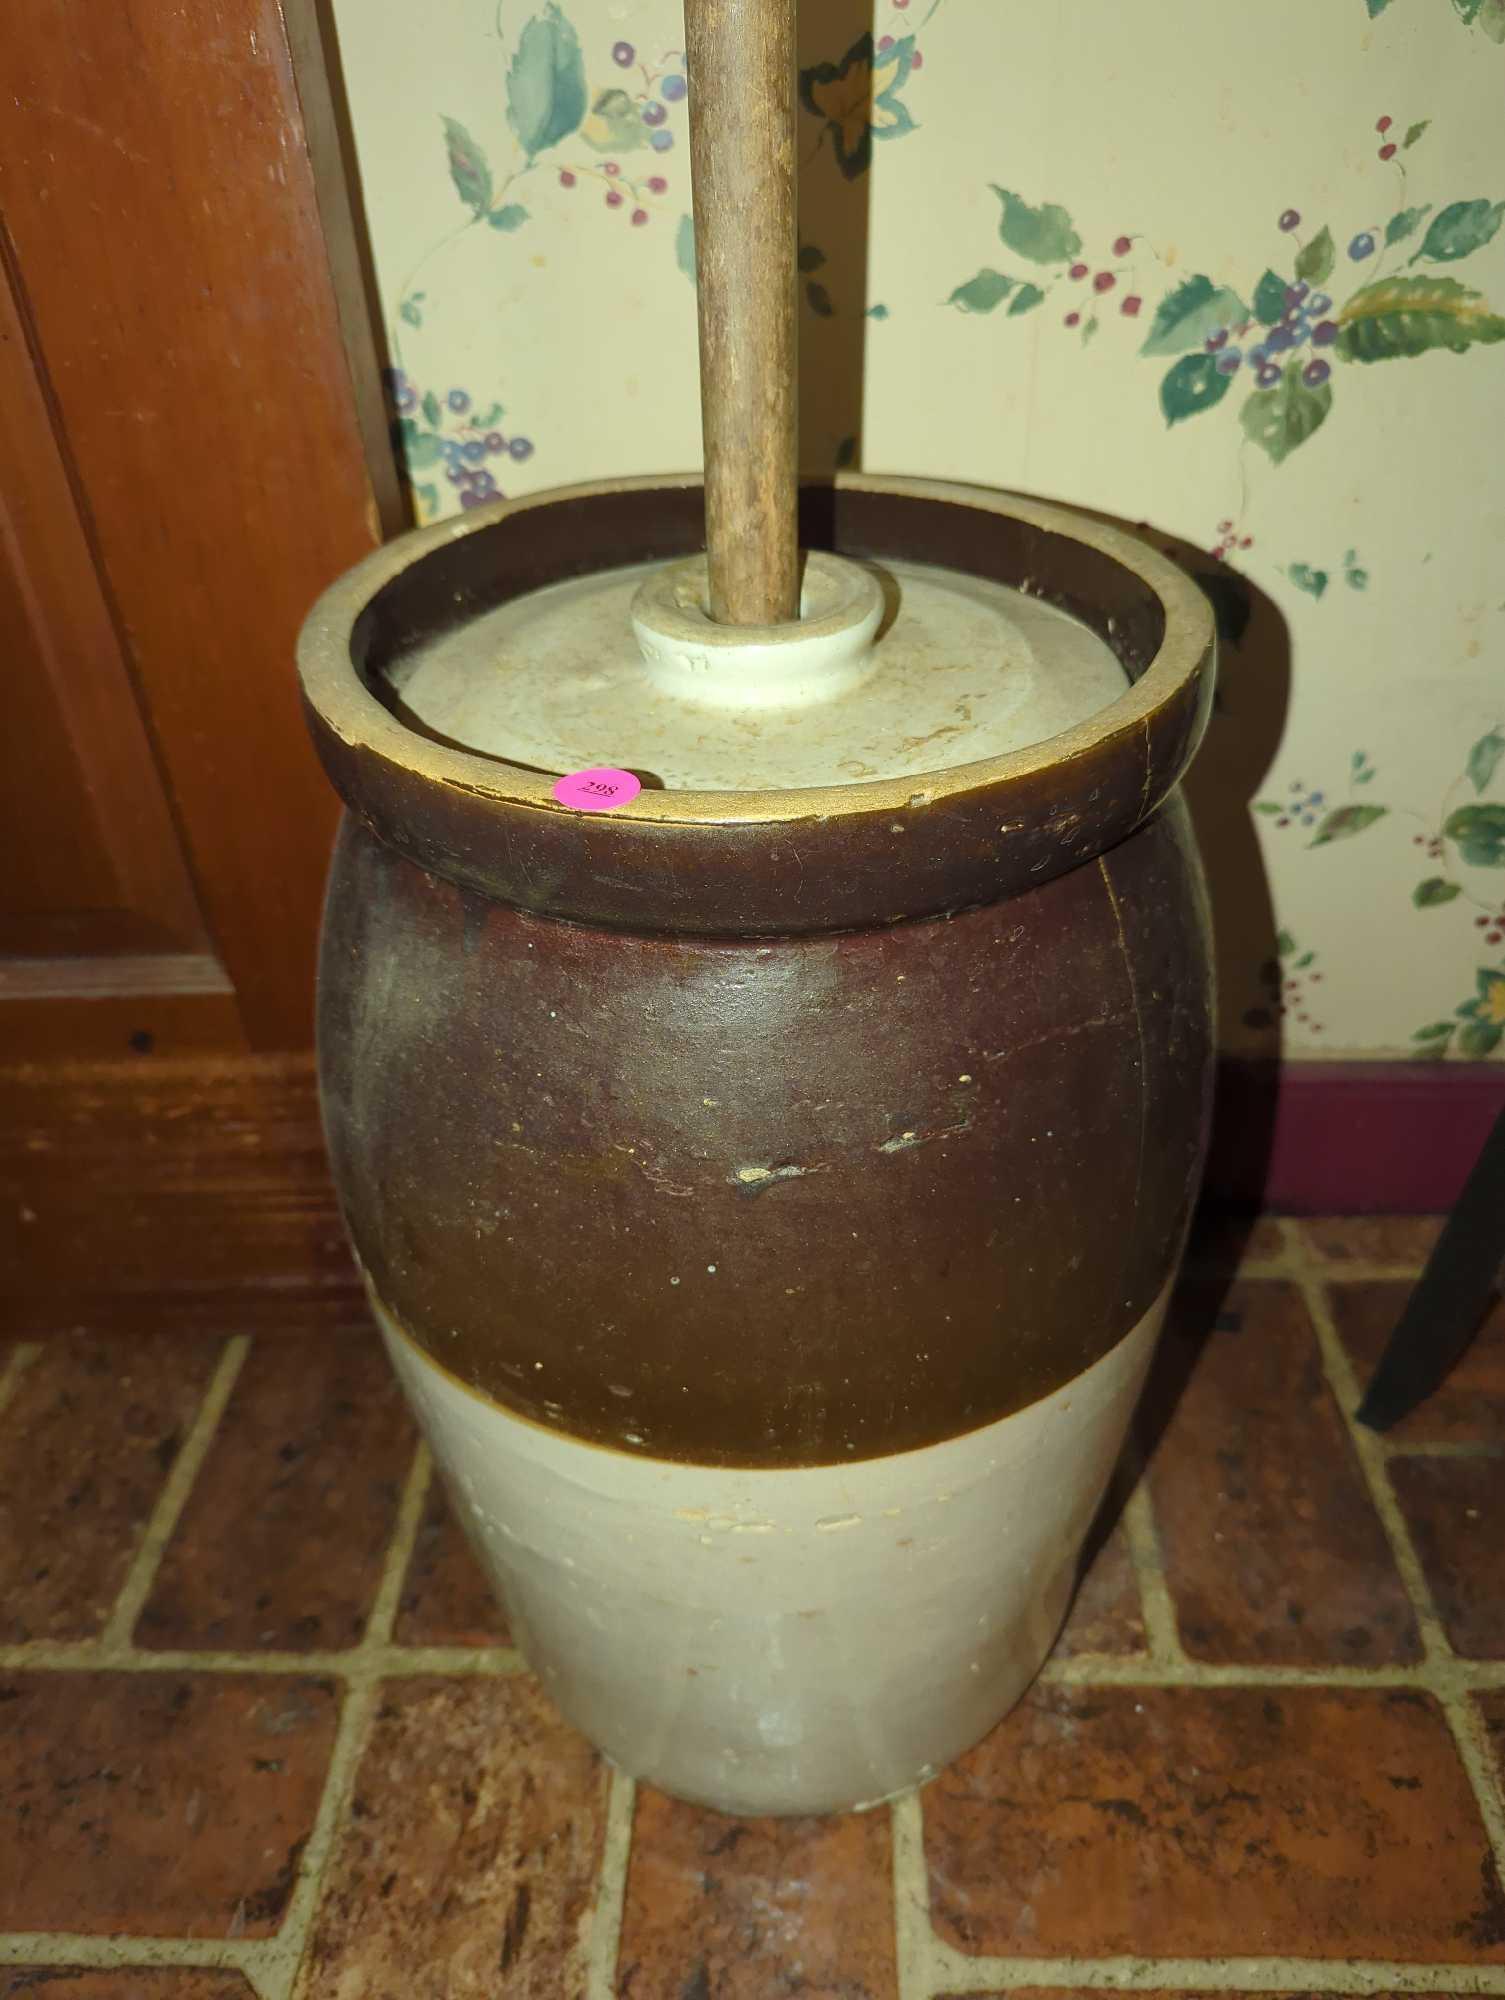 (KIT) ANTIQUE 6 GALLON BUTTER CHURN WITH ORIGINAL LID AND CHURN, MEASURE APPROXIMATELY 10 IN X 18